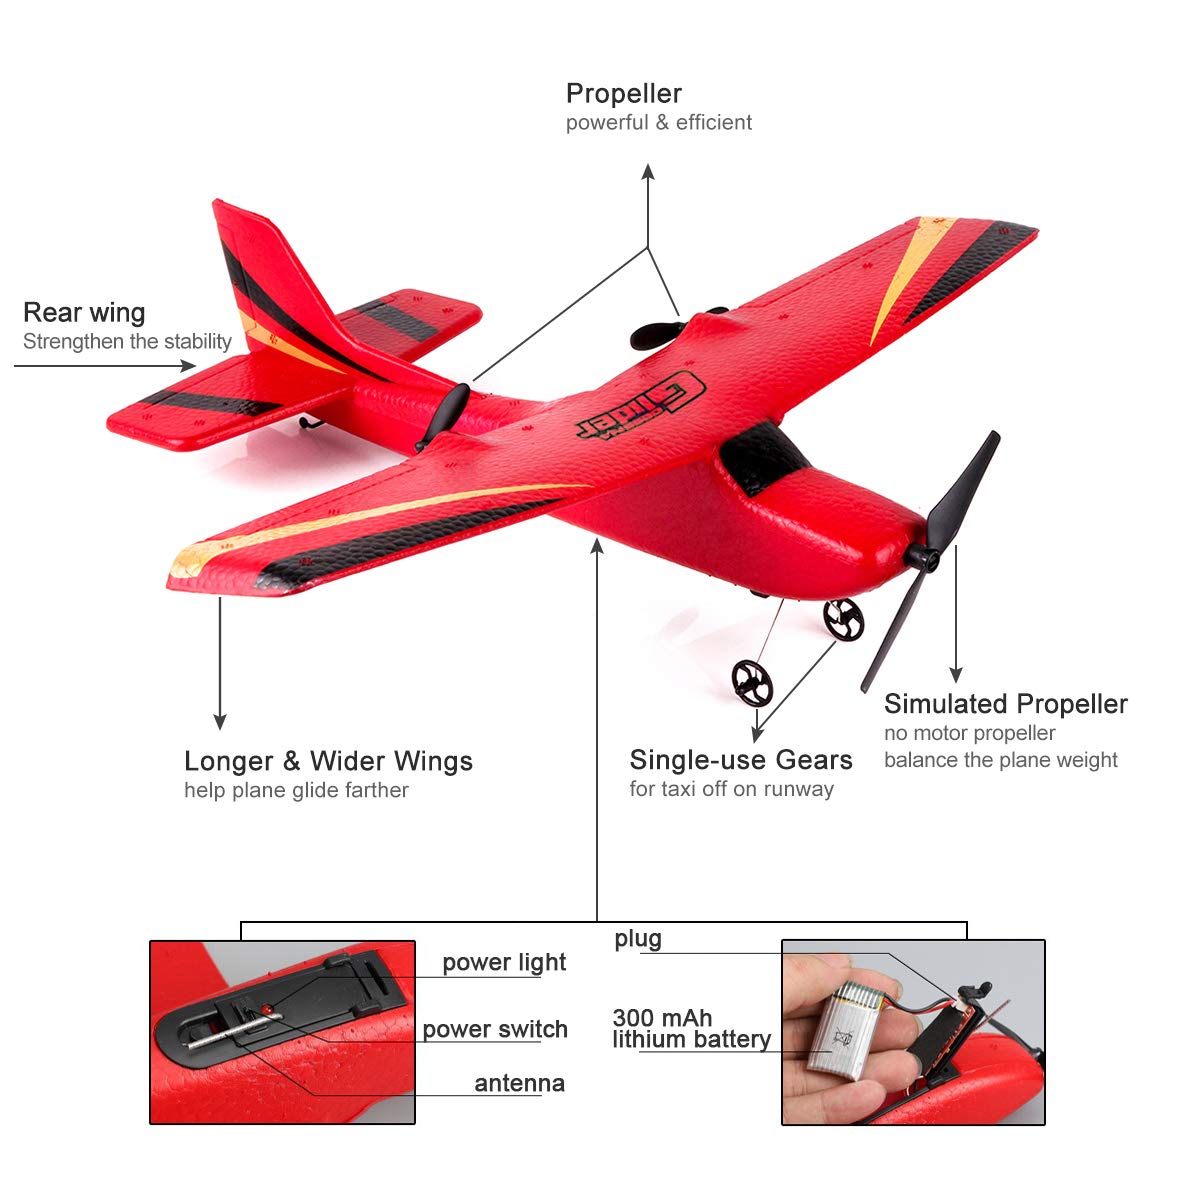 Get Remote Control Plane That Can Fly Pictures